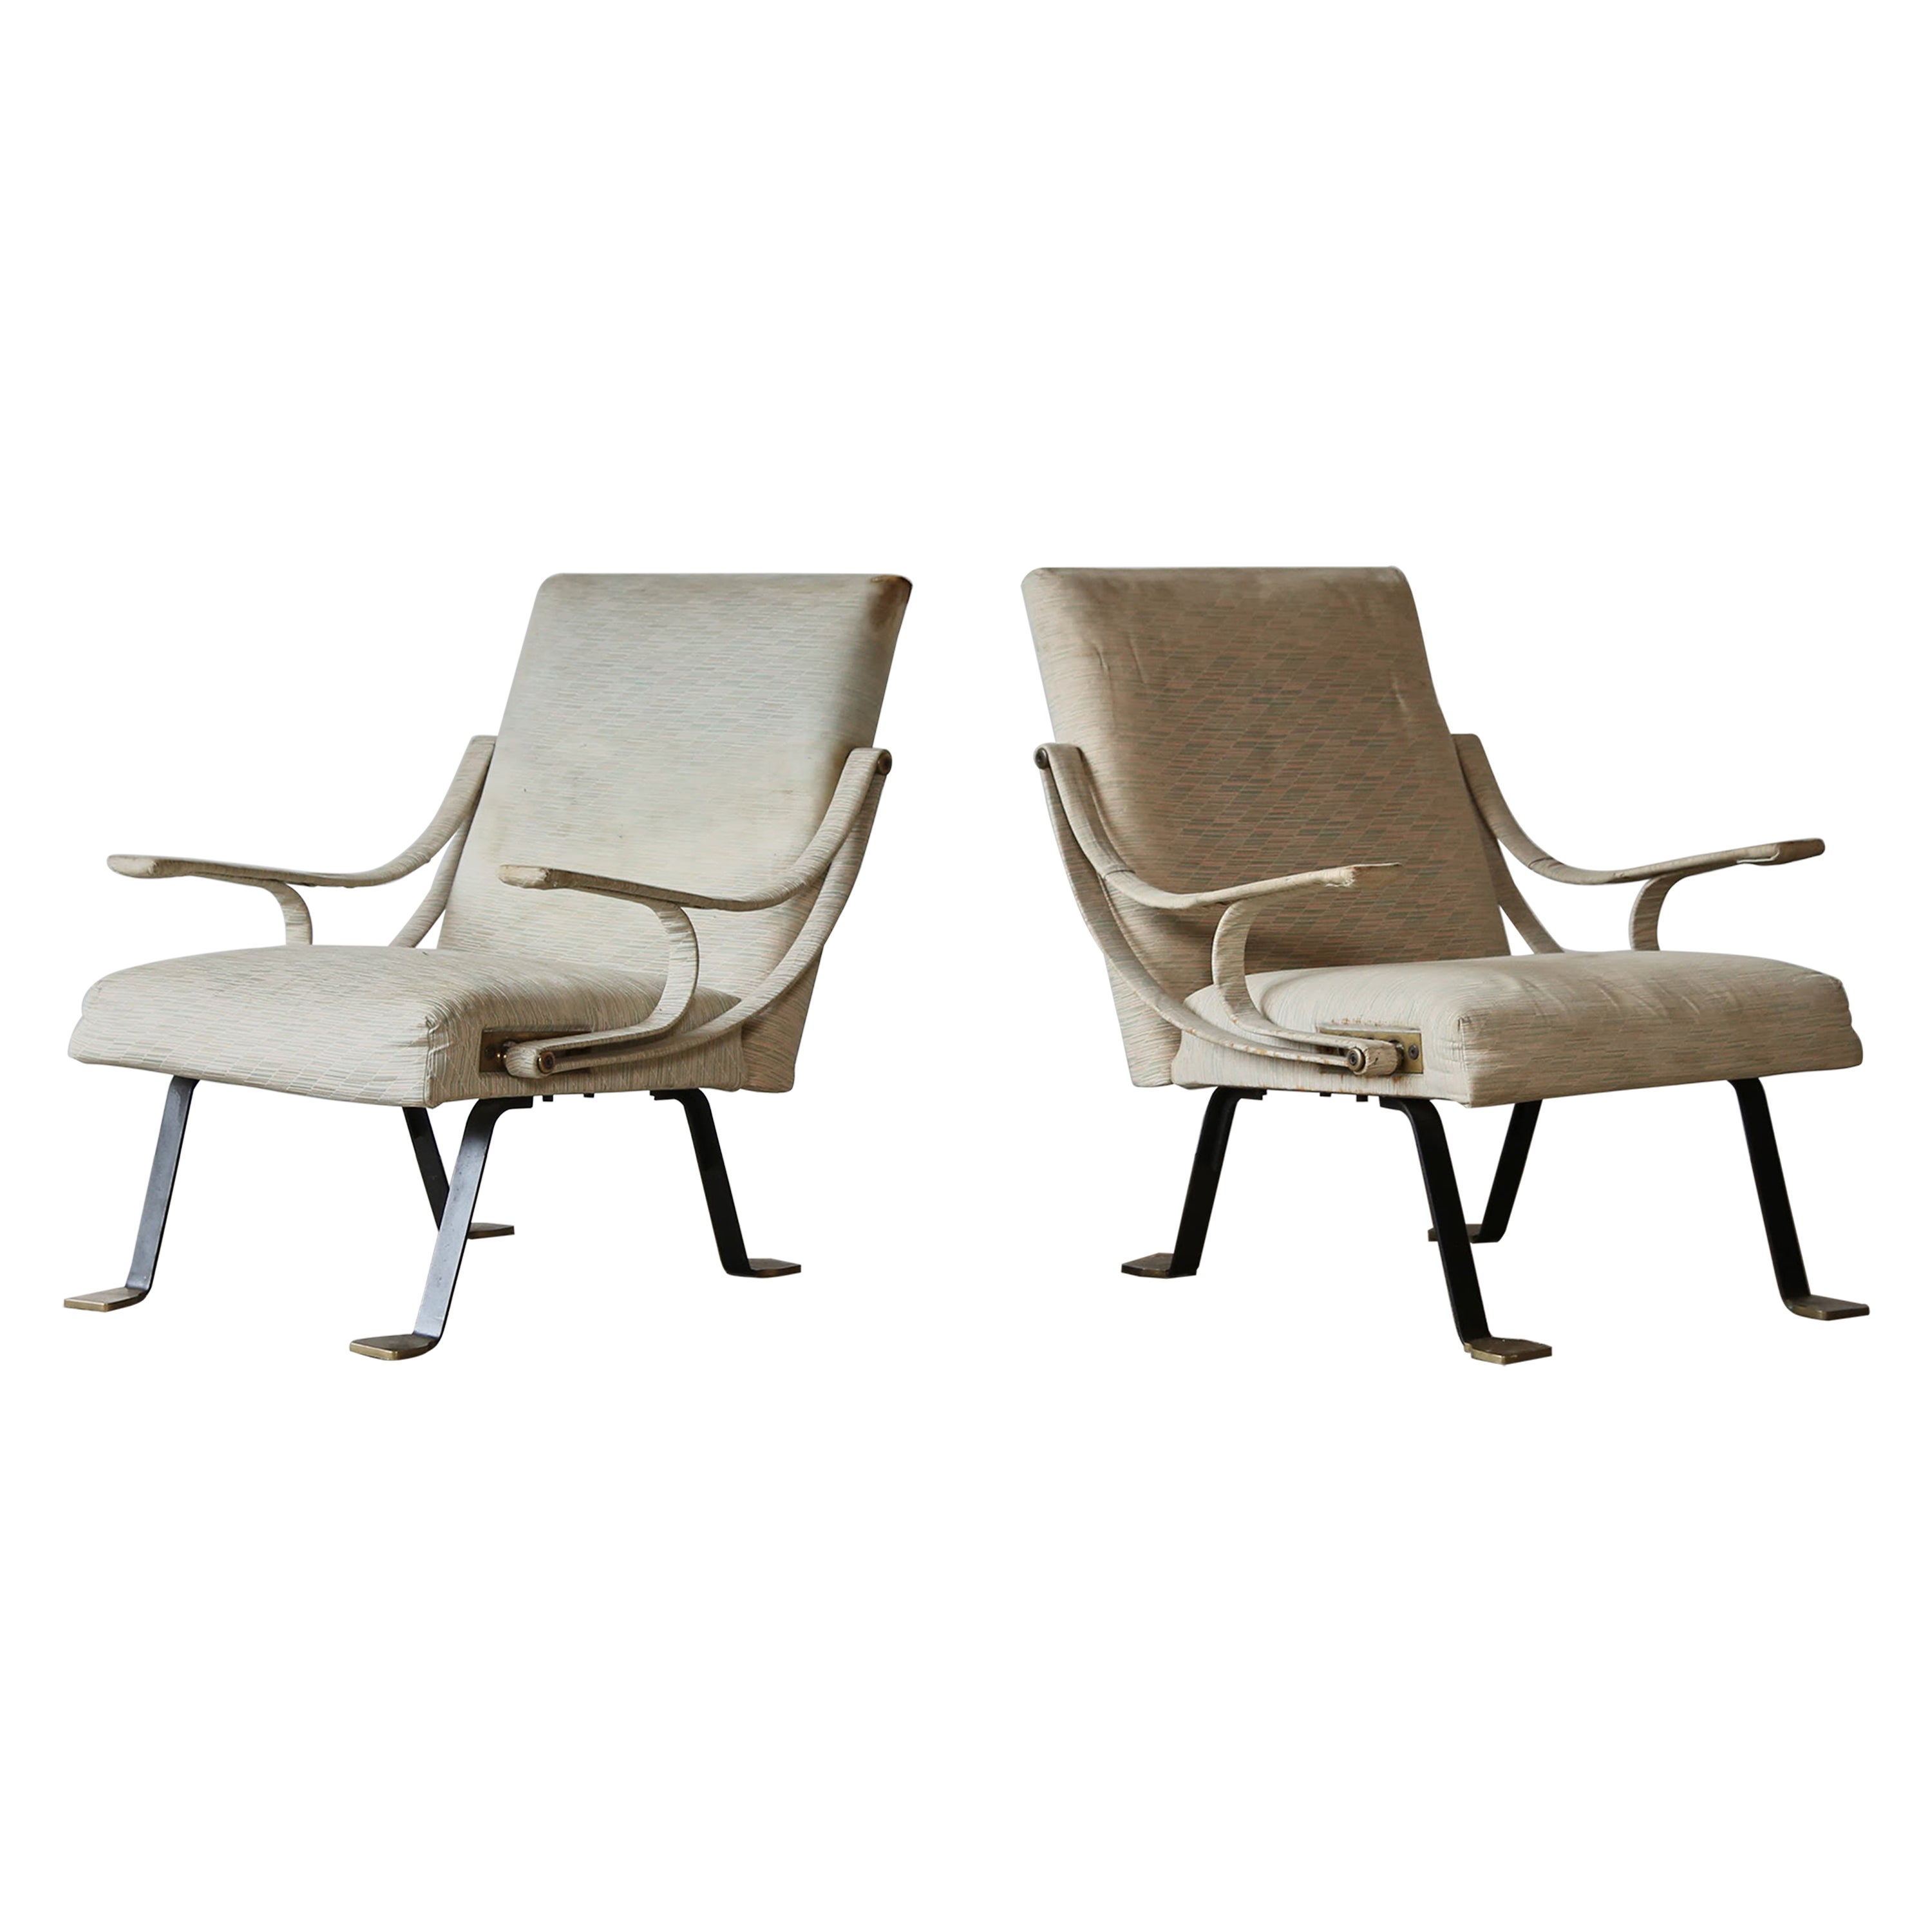 Ignazio Gardella Reclining Digamma Chairs, 1960s, Italy, For Reupholstery For Sale